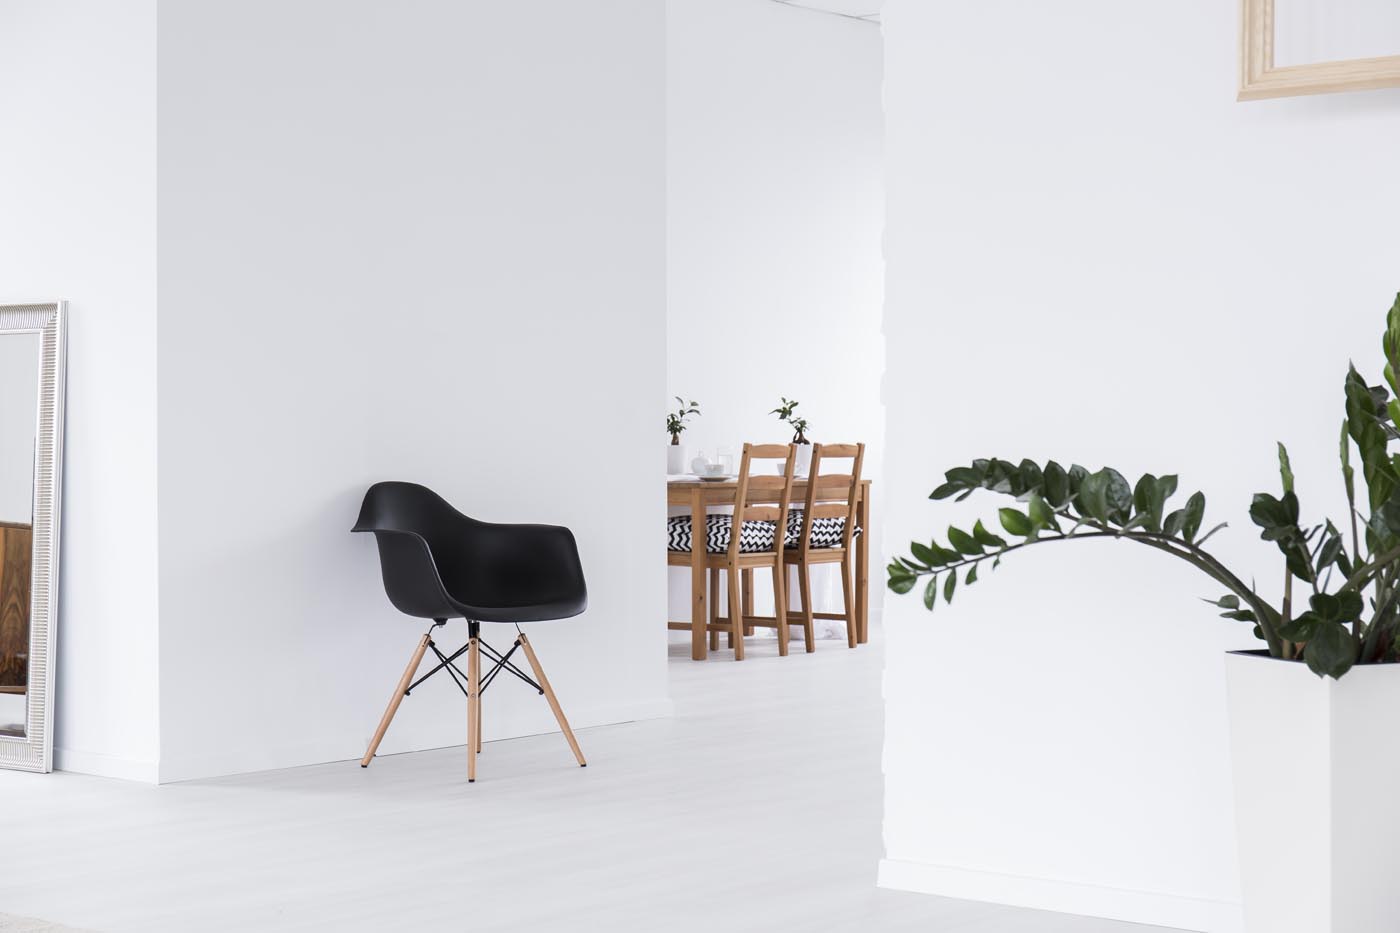 Japanese Minimalism Inspiration for Your Home